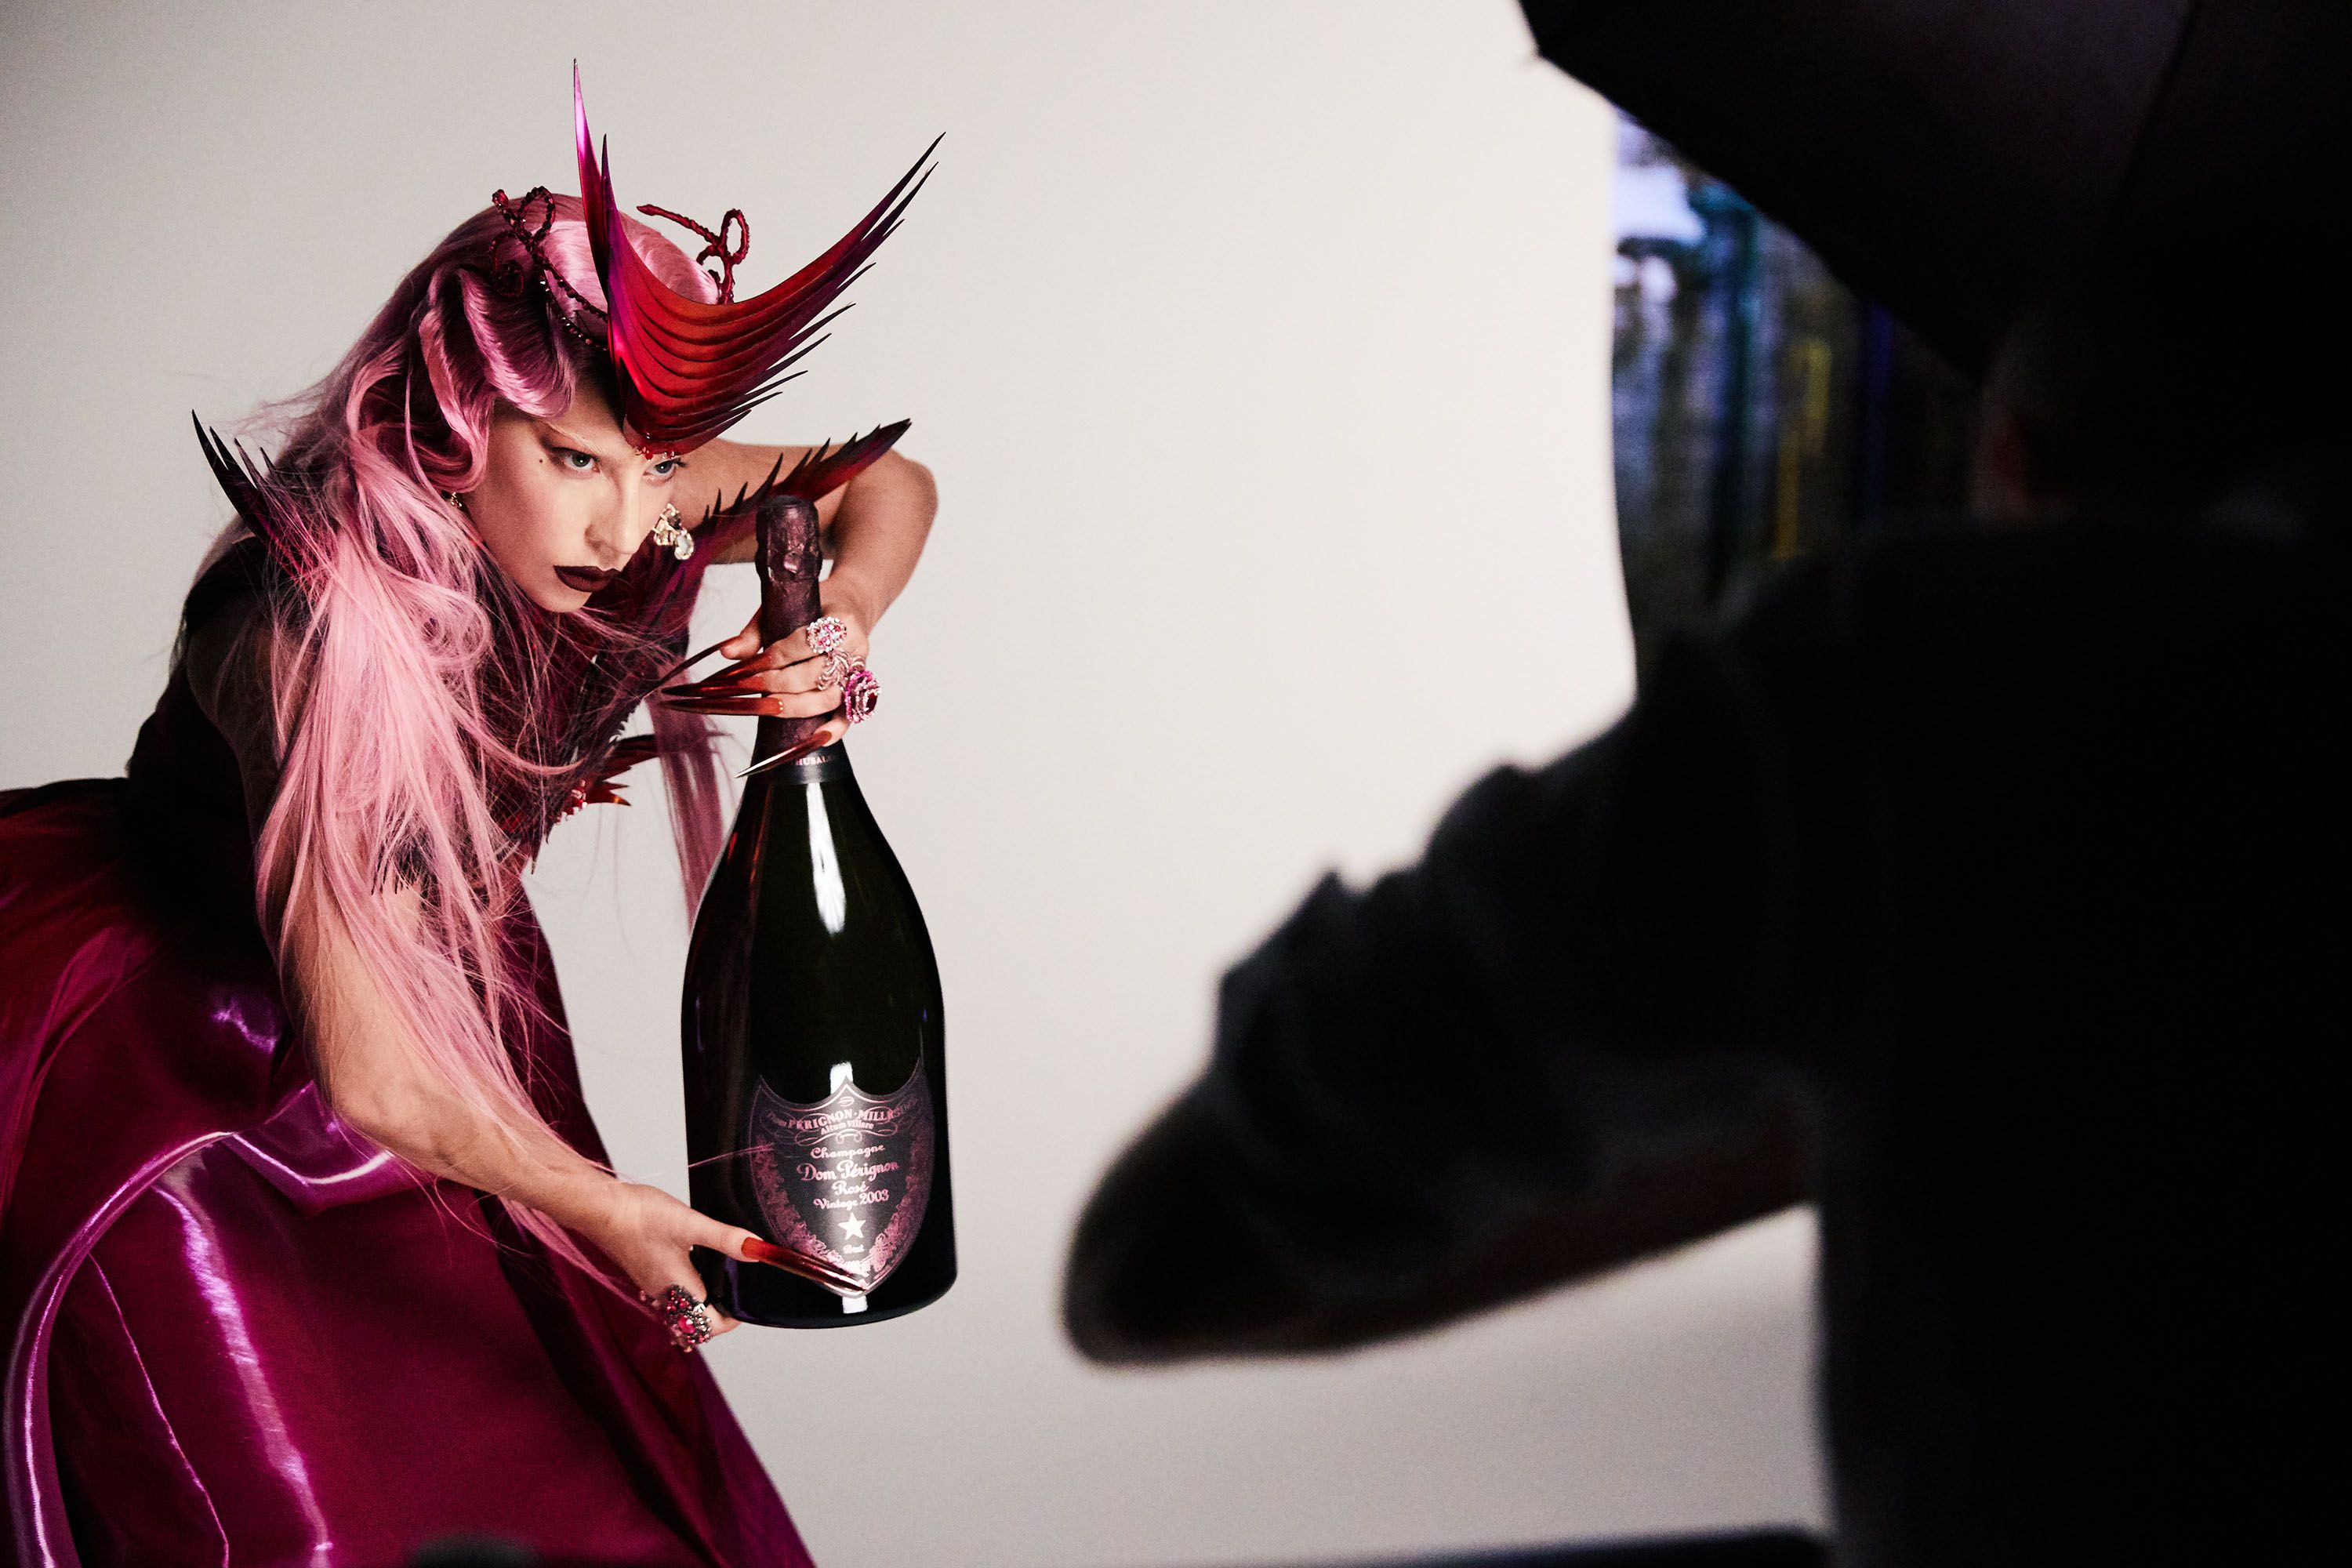 New Releases: Dom Perignon Lady Gaga limited edition Rose 2006